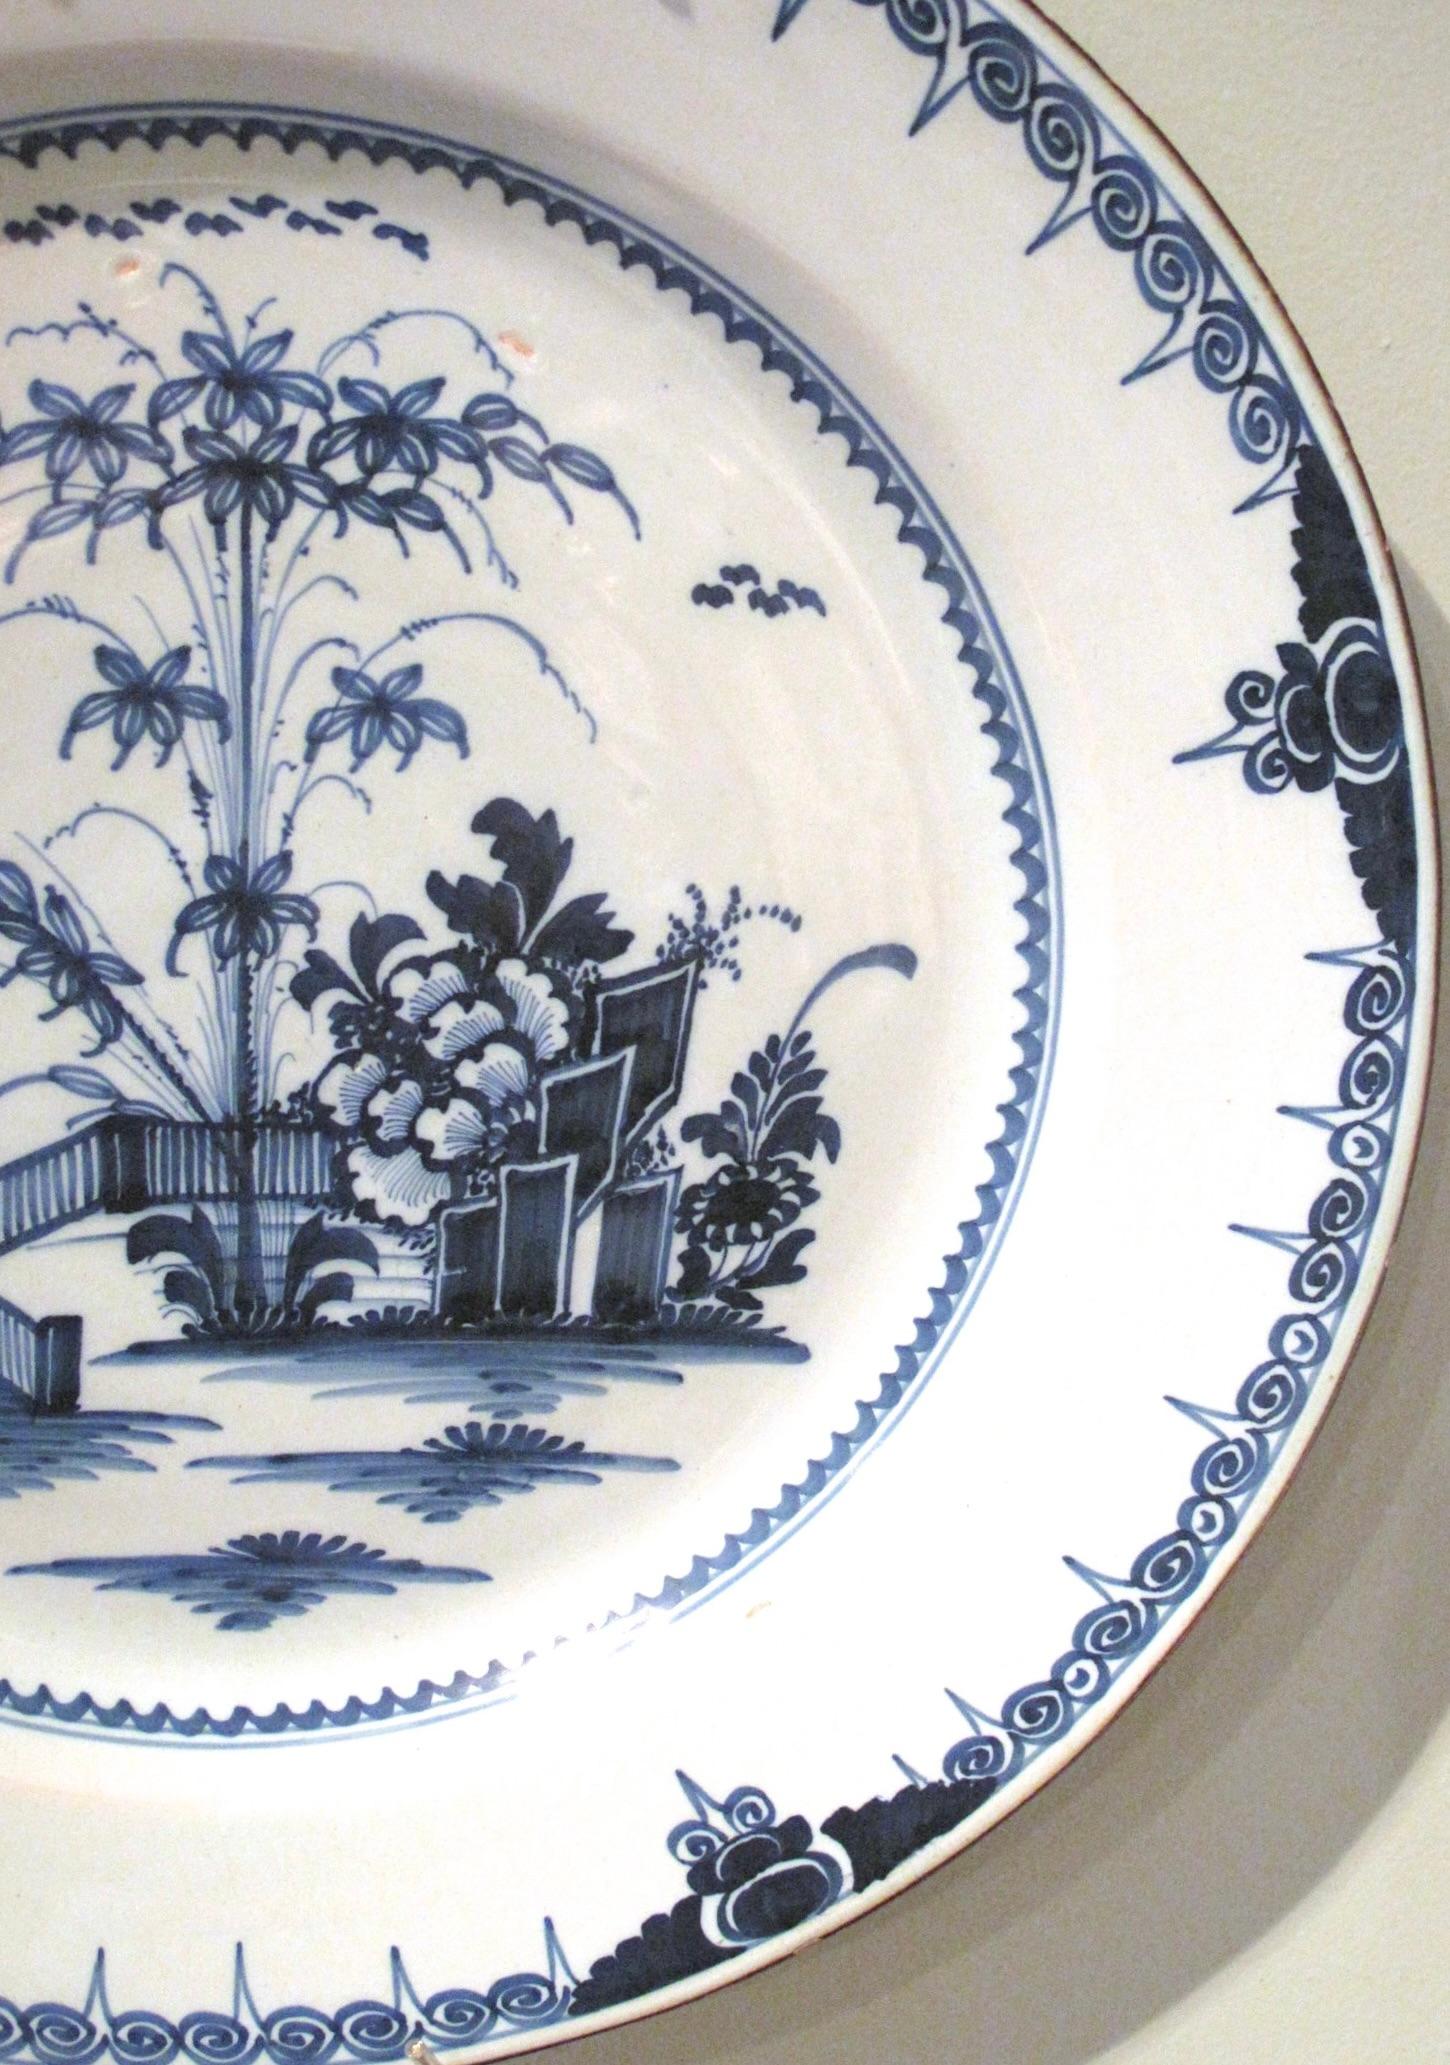 Large Lambeth 18th Century English Delft Charger In Good Condition For Sale In Free Union, VA